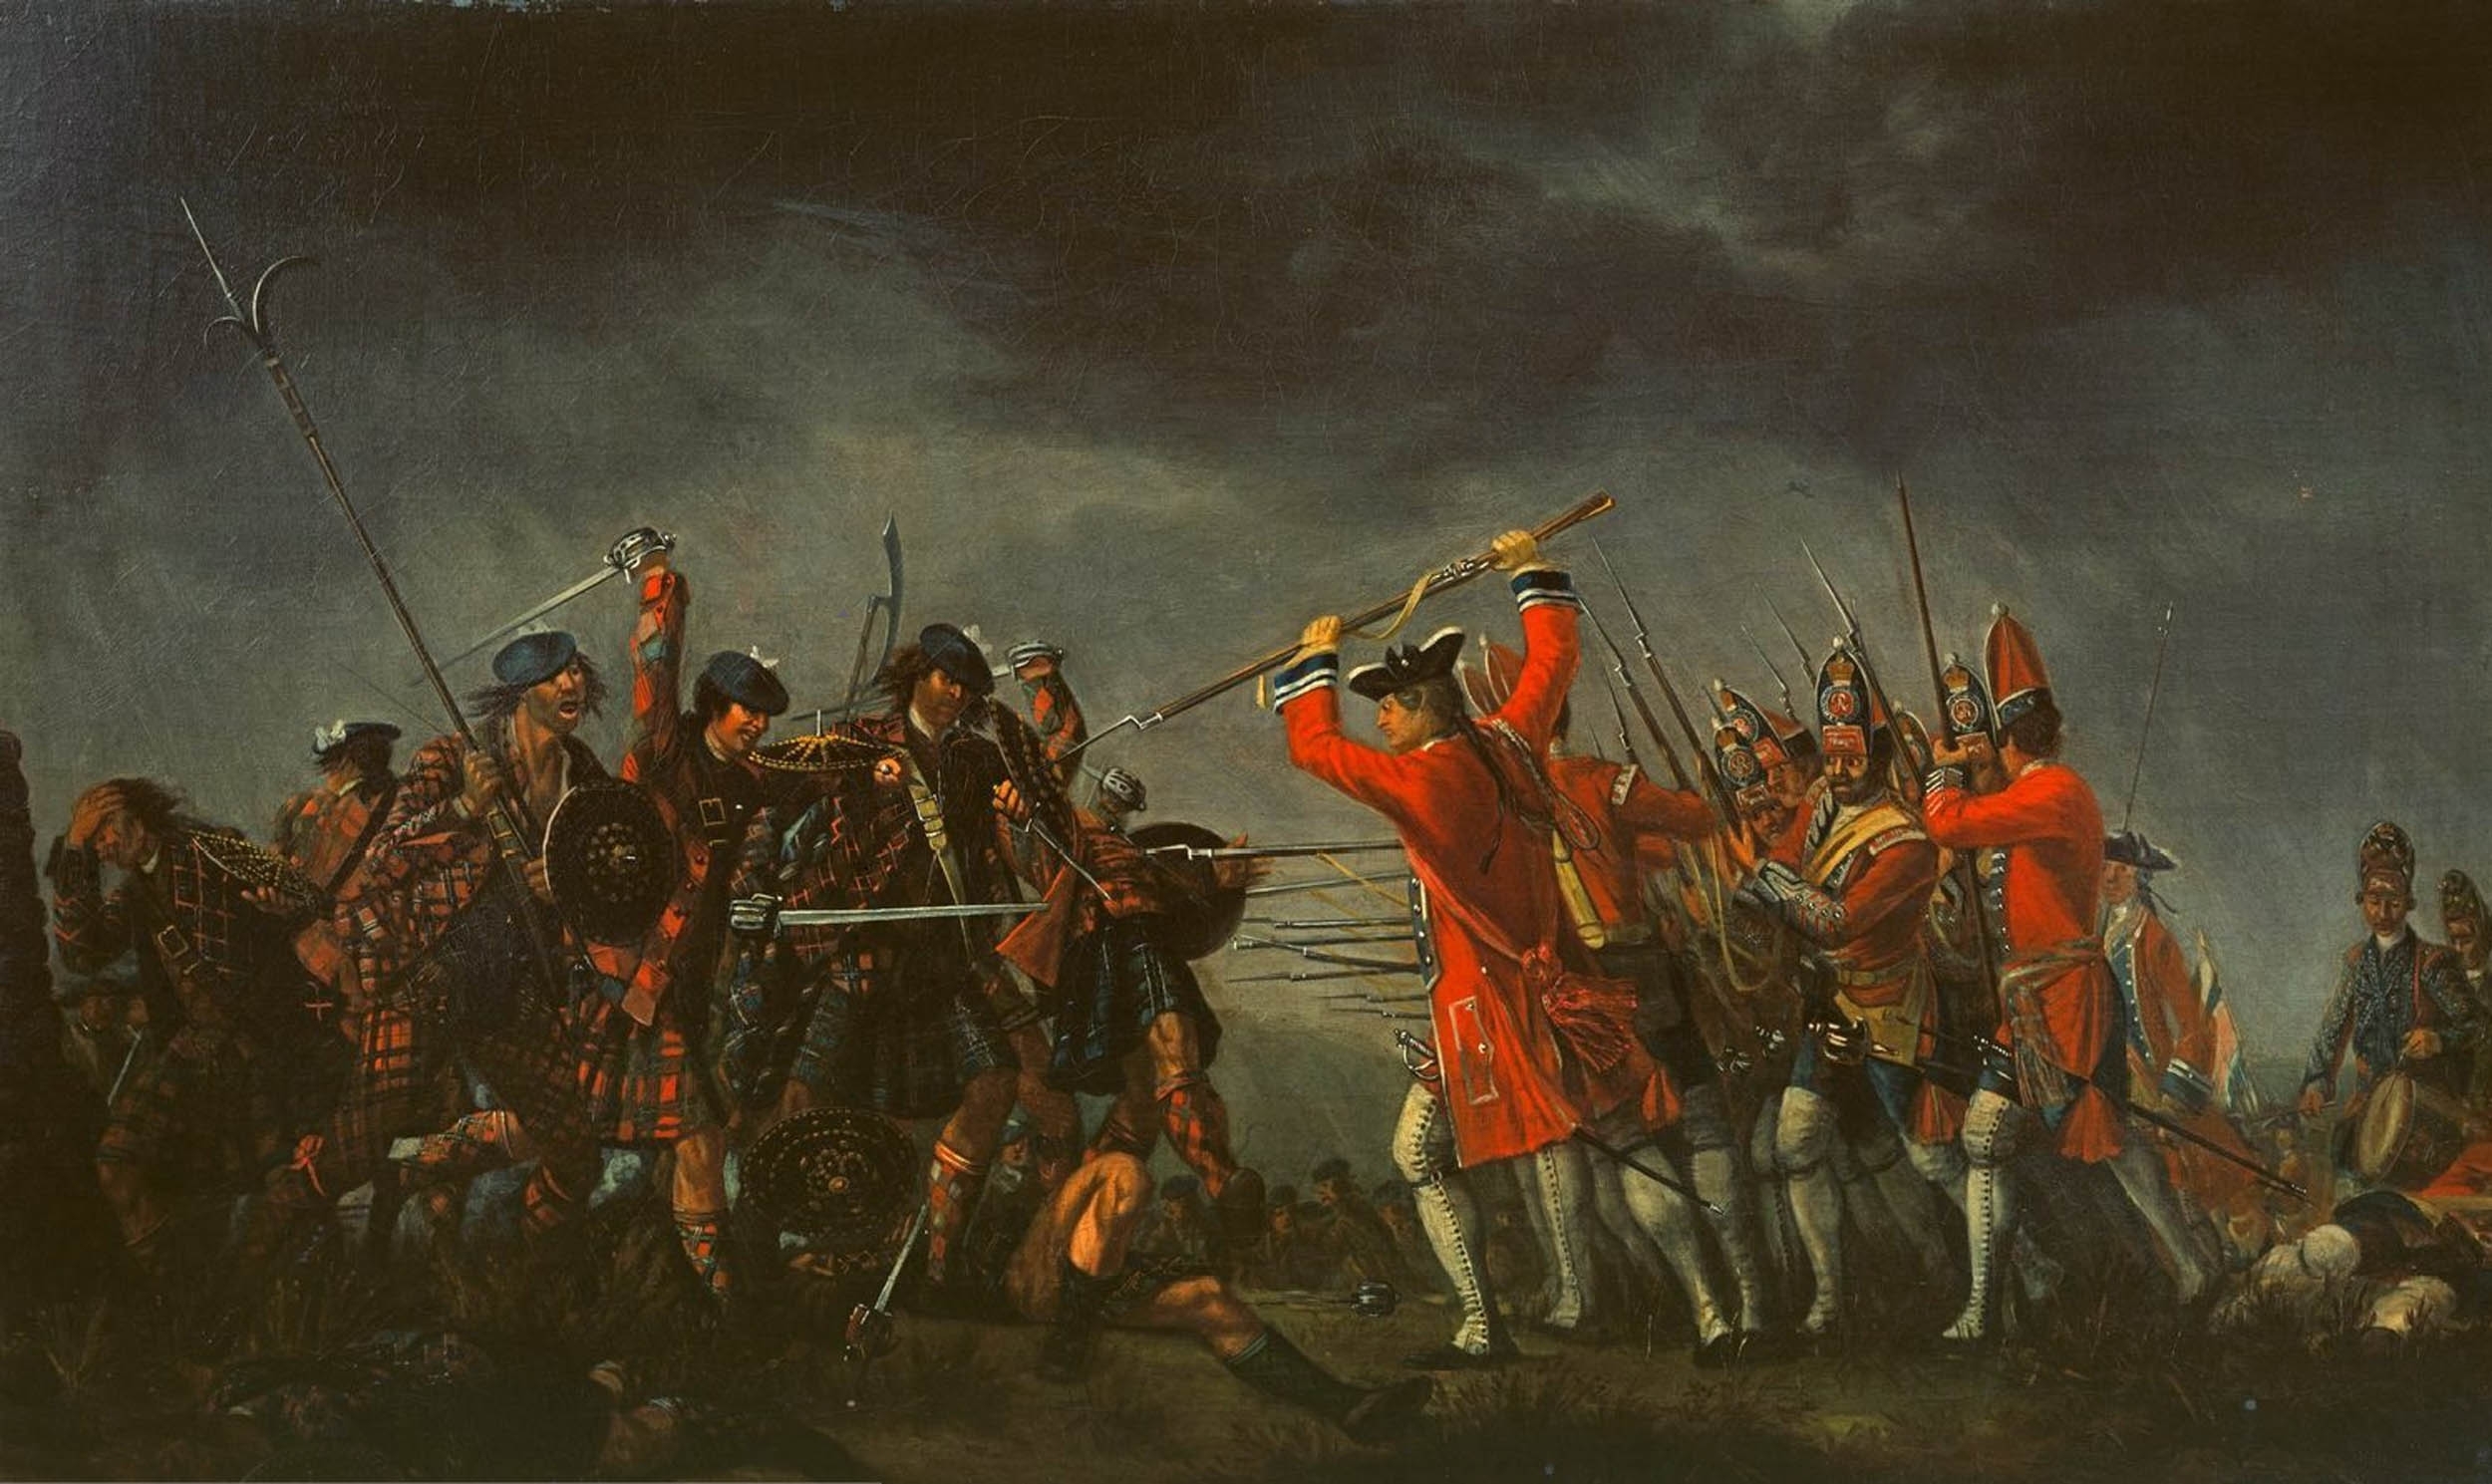 A depiction of the Battle of Culloden, where James and John Rattray fought alongside Bonnie Prince Charlie